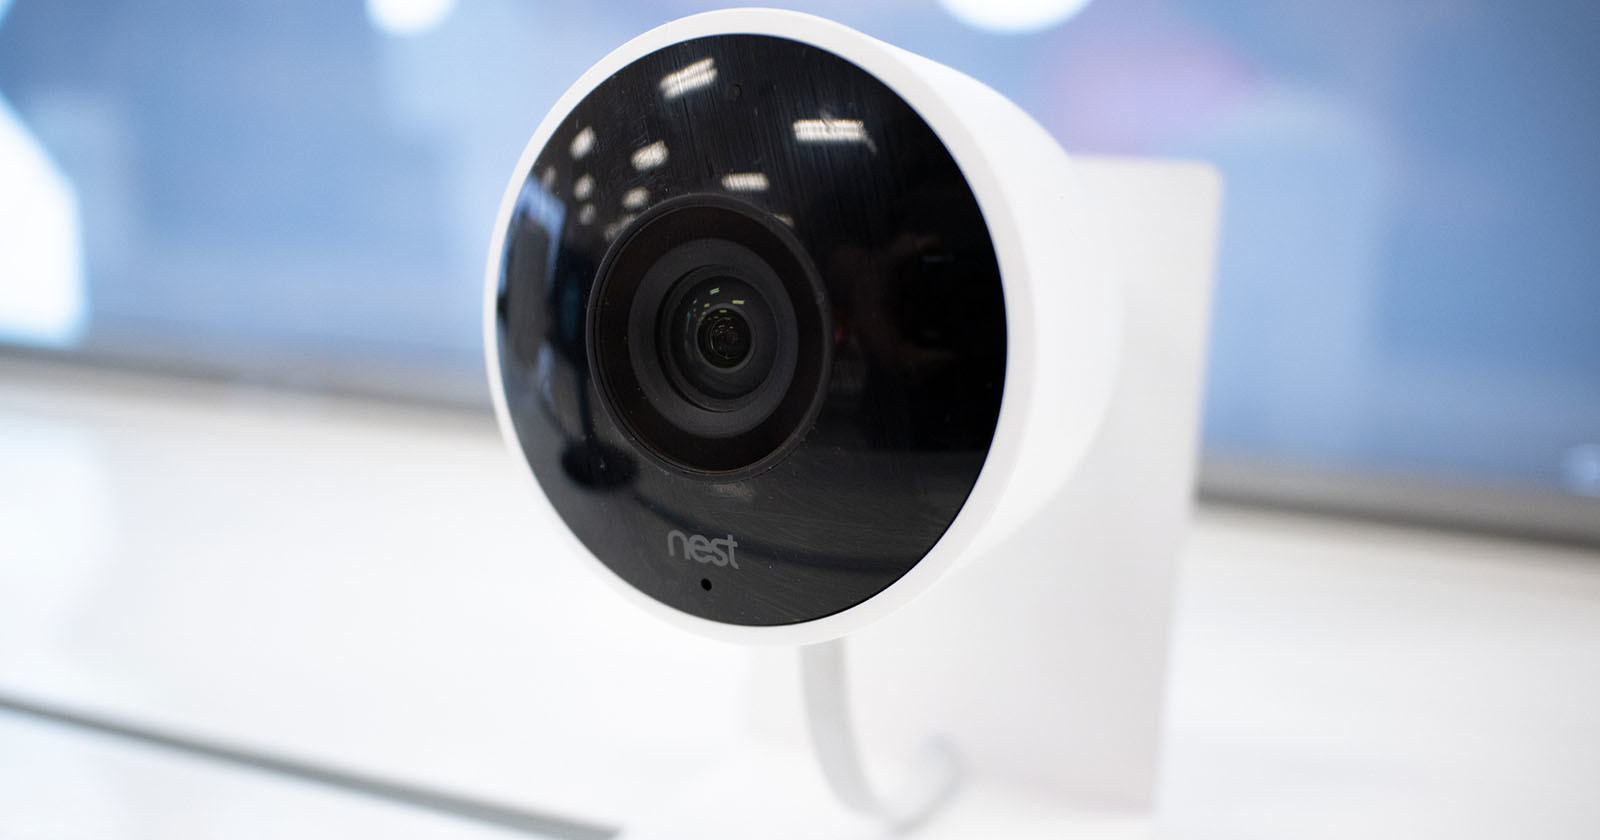  google nest will provide data police without warrant 